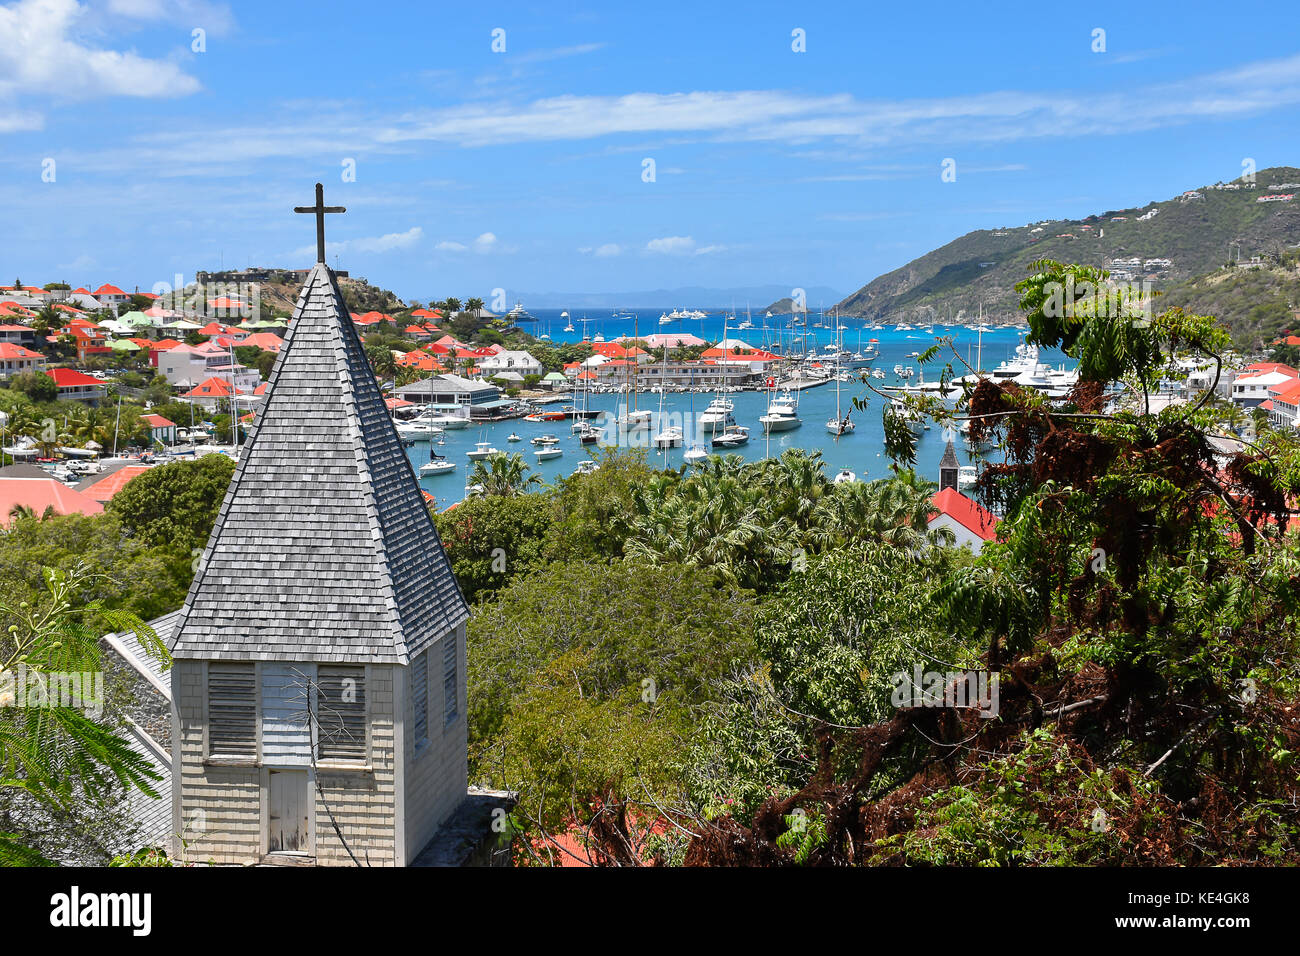 St Barts, Caribbean, harbor view with church in front Stock Photo